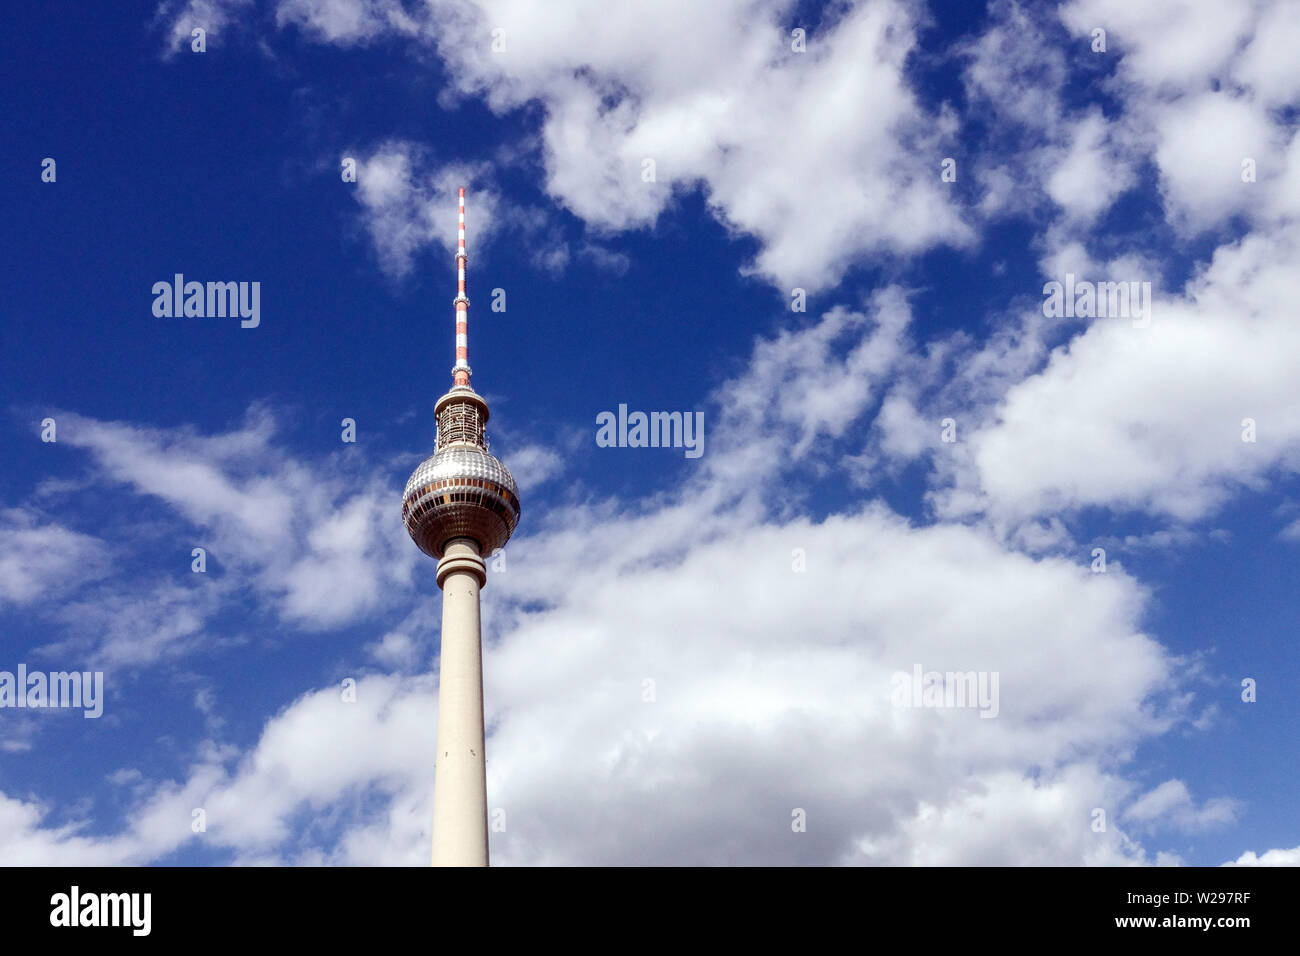 Berlin weather TV Tower Germany Clouds Stock Photo